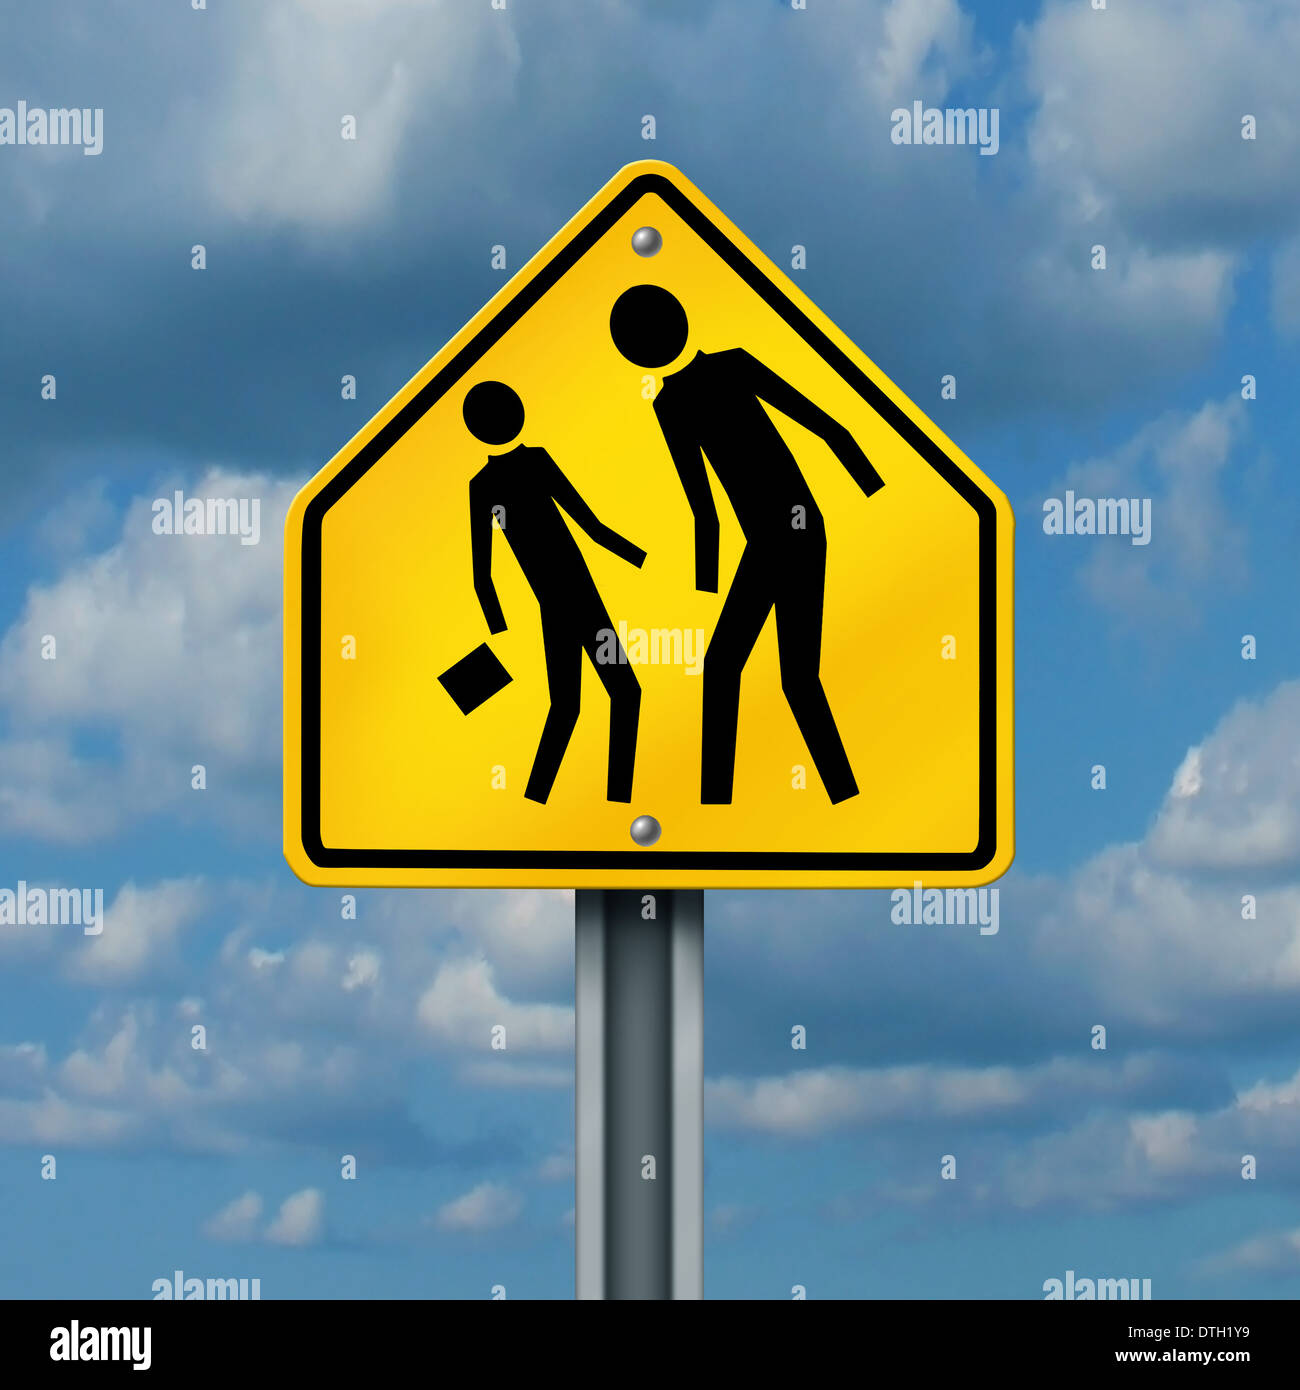 School bullying concept as a yellow traffic sign with an abusive bully attacking or harassing a smaller defenseless student as a symbol of the anxiety of being bullied and the social issues of childhood fear. Stock Photo